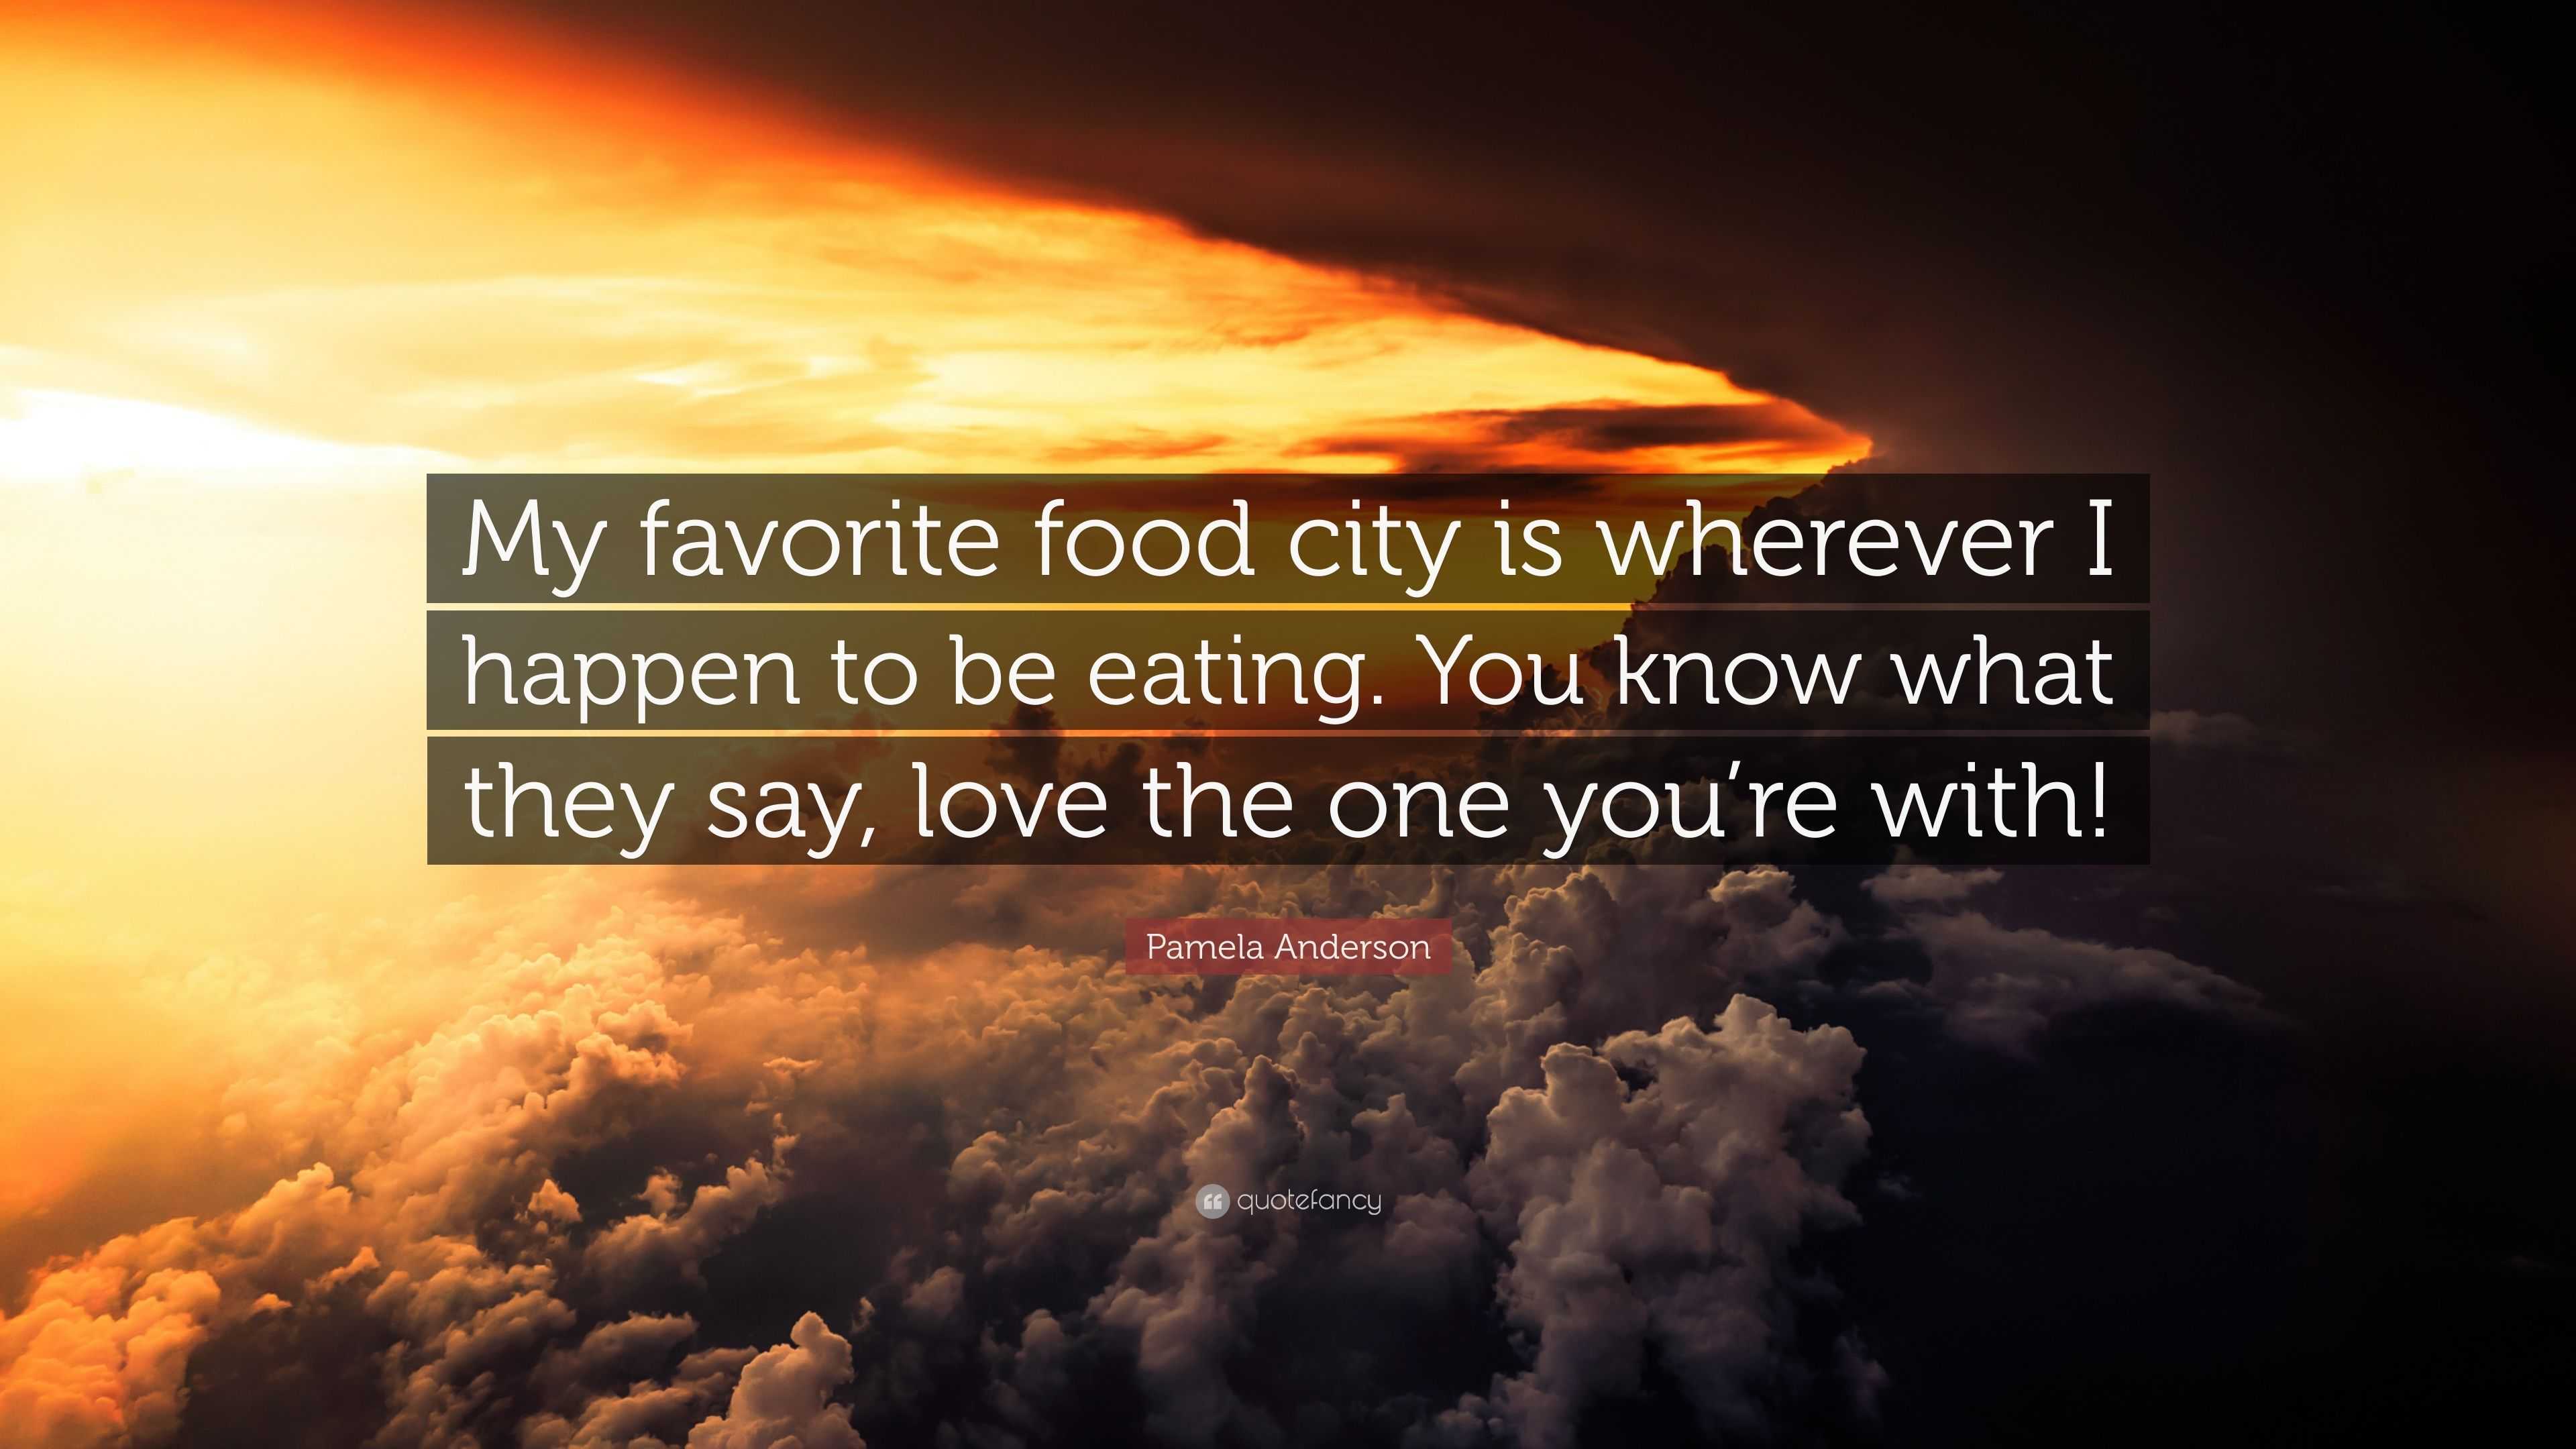 Pamela Anderson Quote “My favorite food city is wherever I happen to be eating